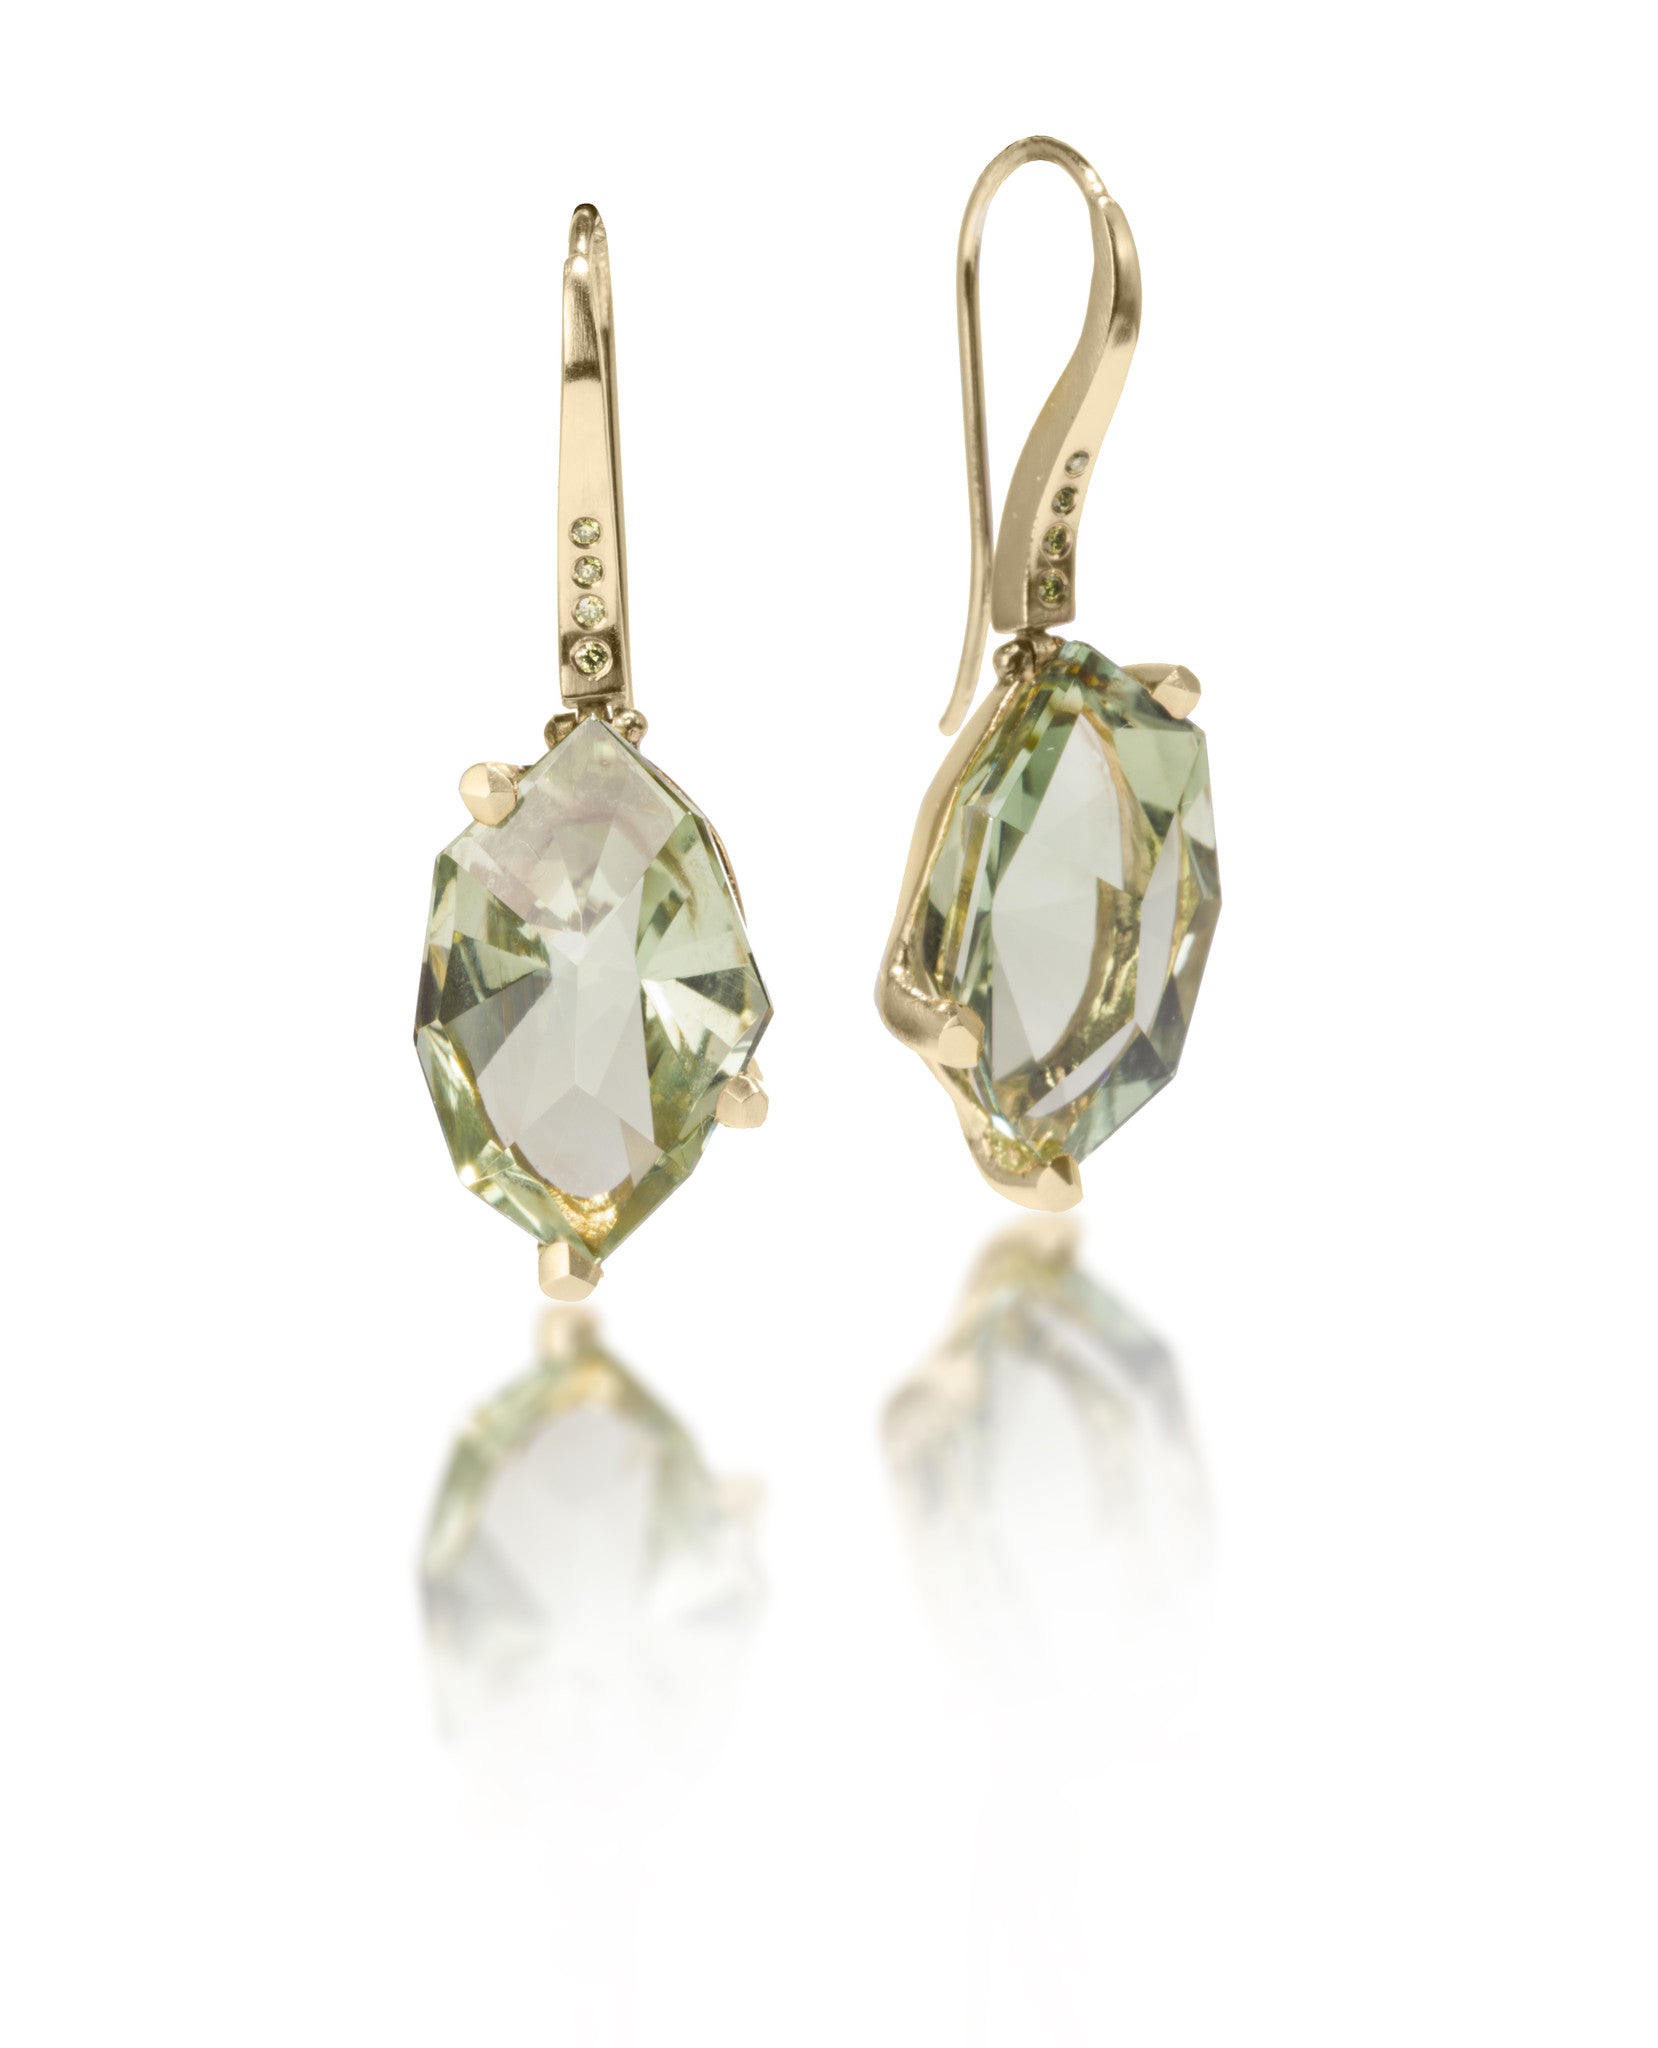 Facets earrings #2, size small in 18k, set with green amethyst. Unique, hand cut faceted chunks of green amethyst set in faceted prong settings of 18k, hanging from a curved earwire set with four ice green [color treated] diamonds. 18k ear wires.